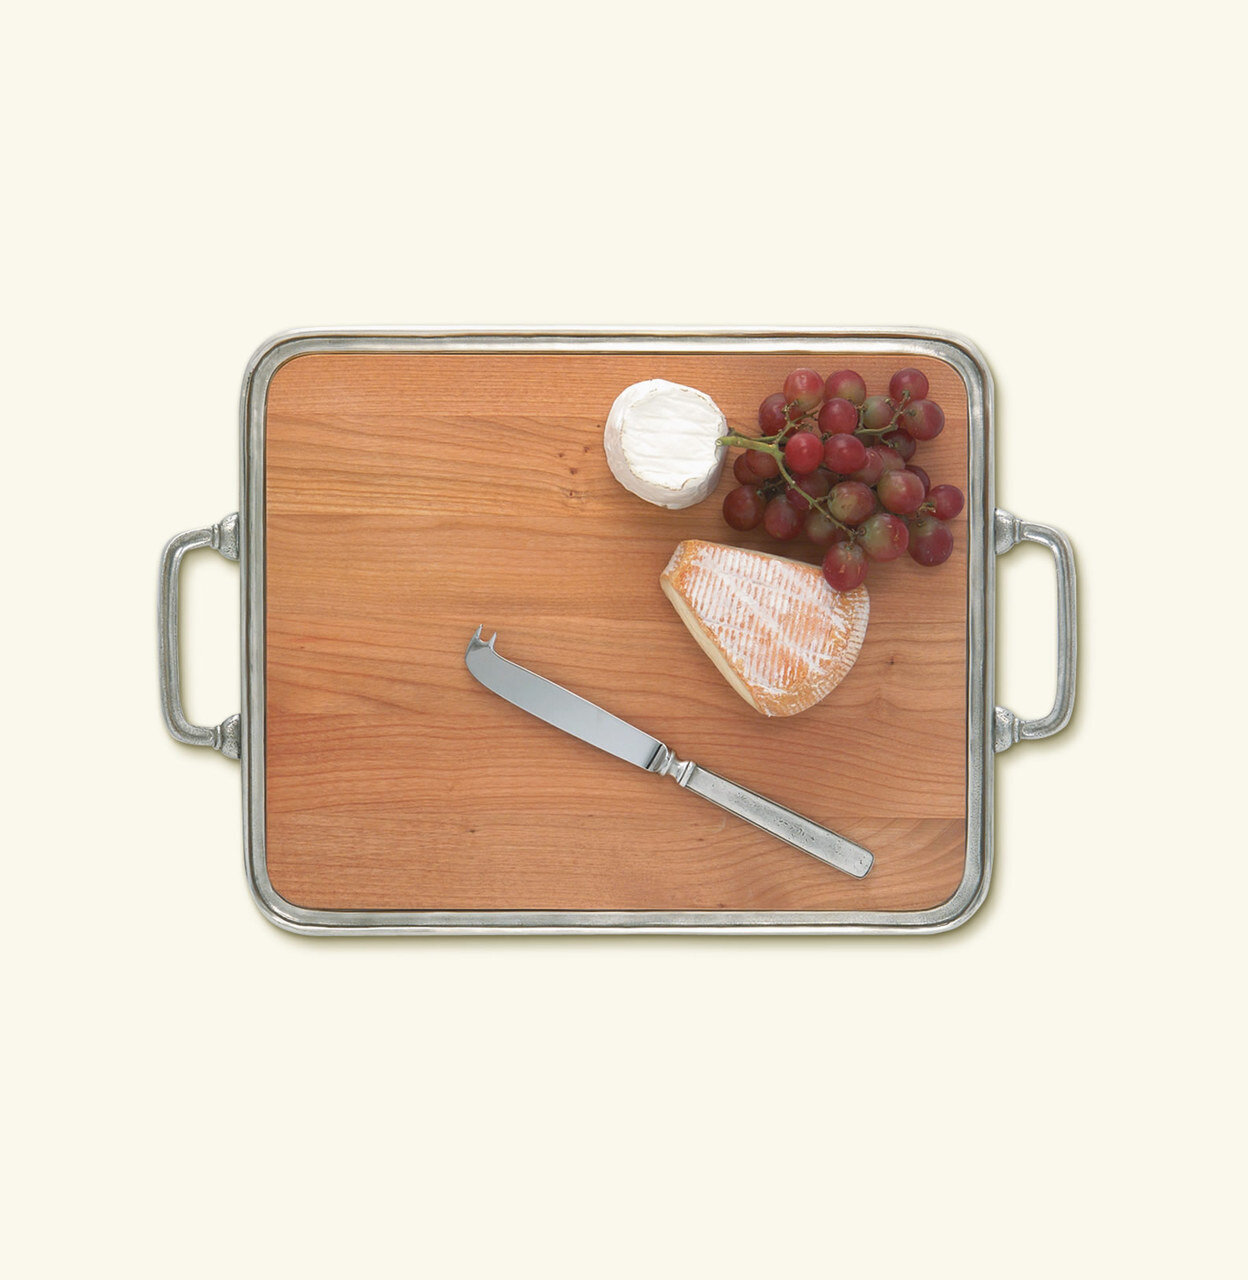 Match Pewter Cheese Tray With Handles Cherry Wood Medium 1131.1